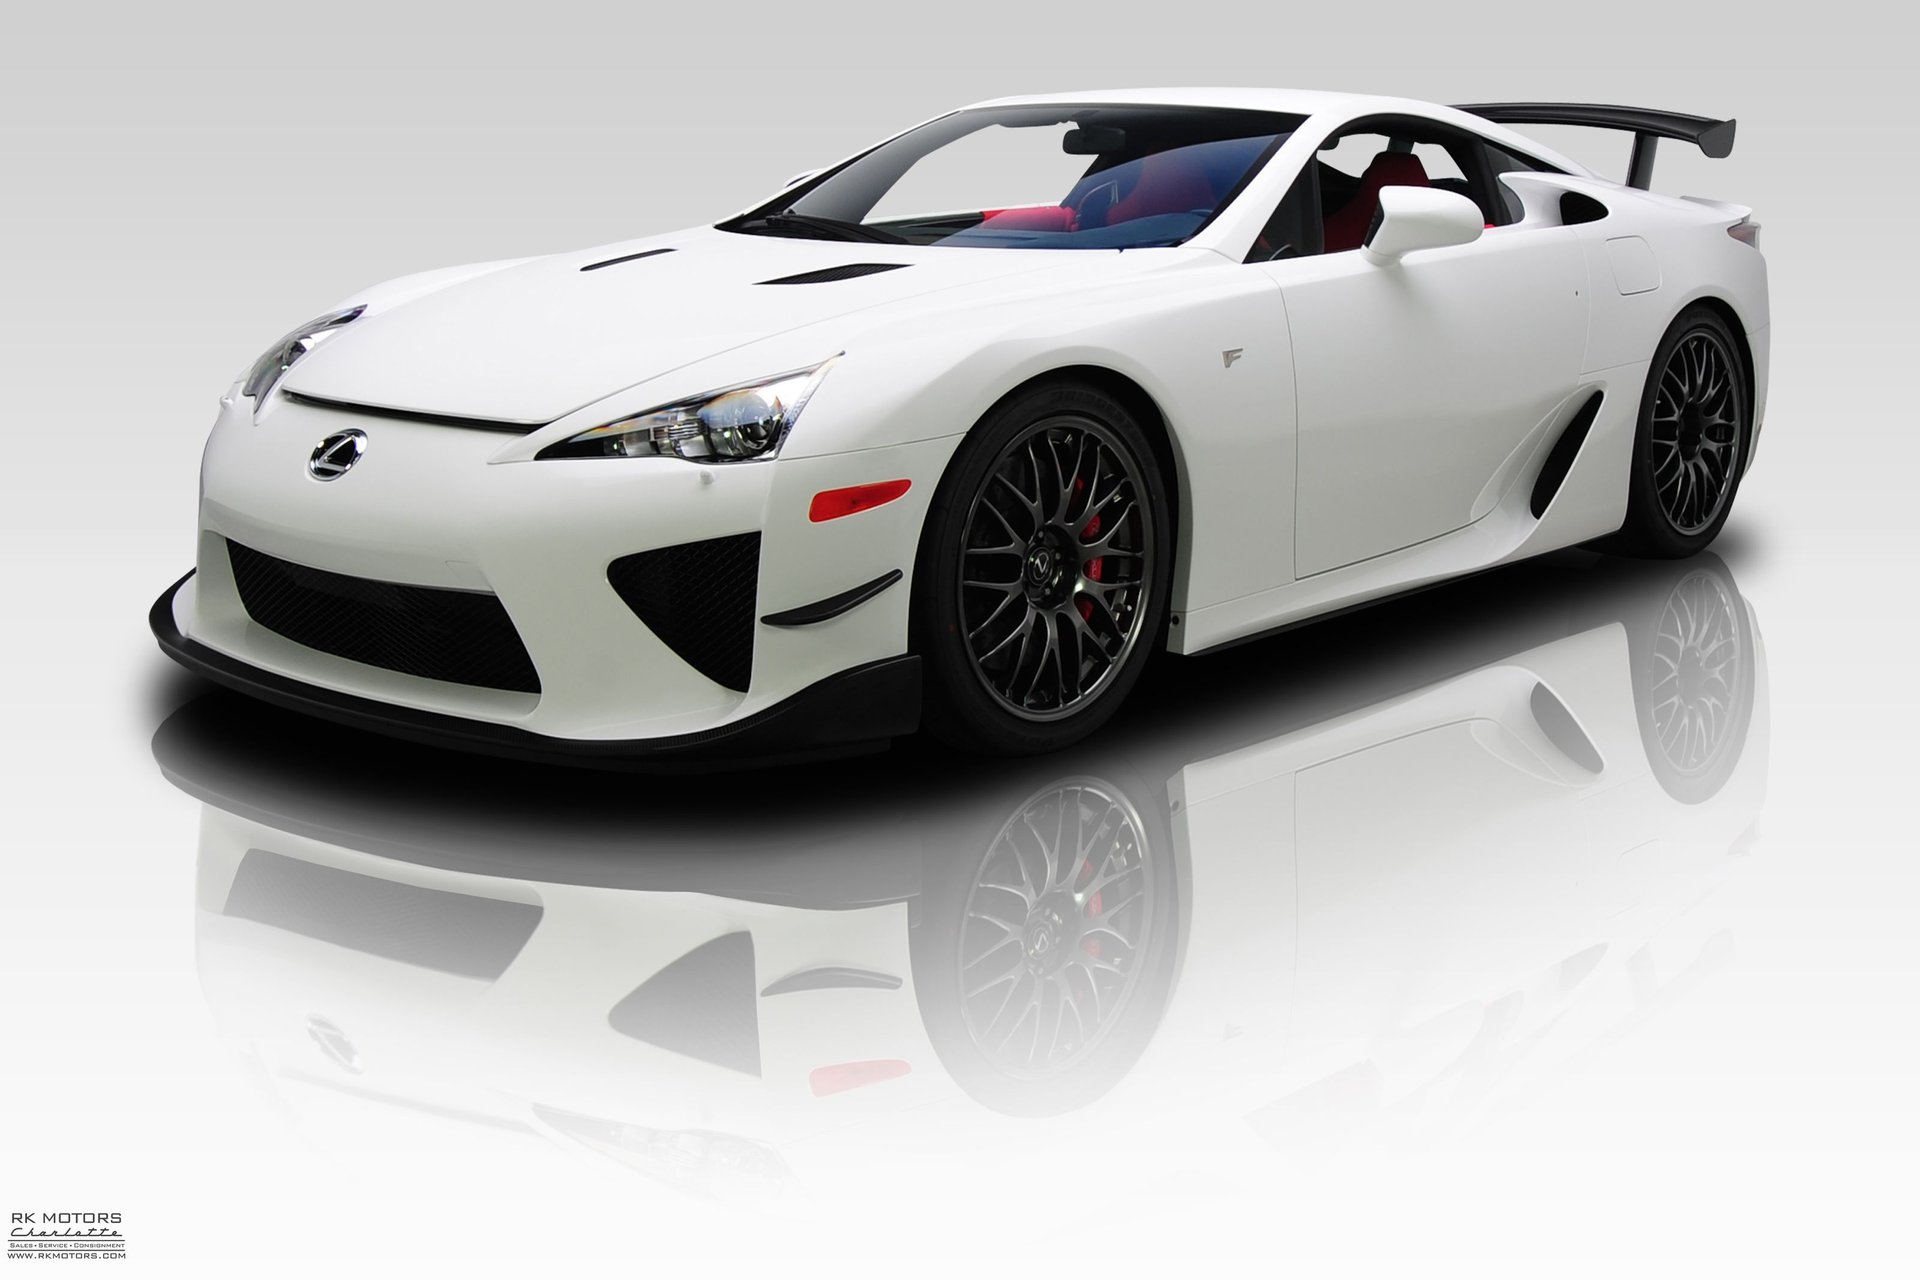 132994 2012 Lexus Lfa Rk Motors Classic Cars And Muscle Cars For Sale